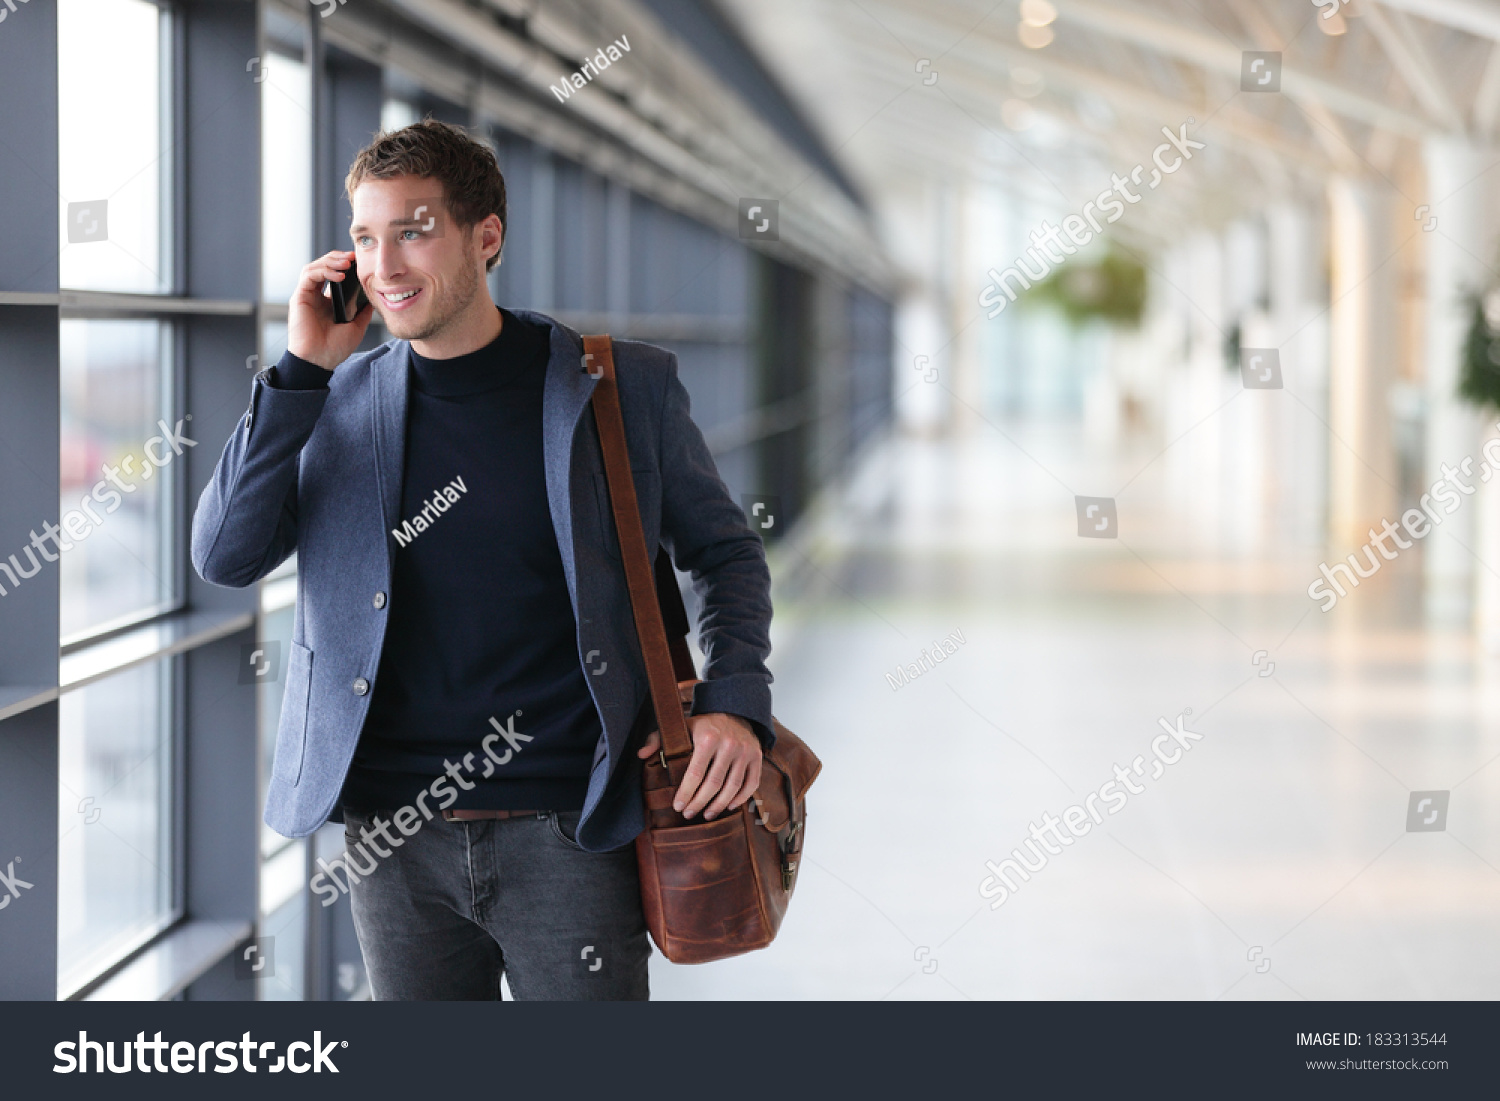 Urban business man talking on smart phone traveling walking inside in airport. Casual young businessman wearing suit jacket and shoulder bag. Handsome male model in his 20s. #183313544